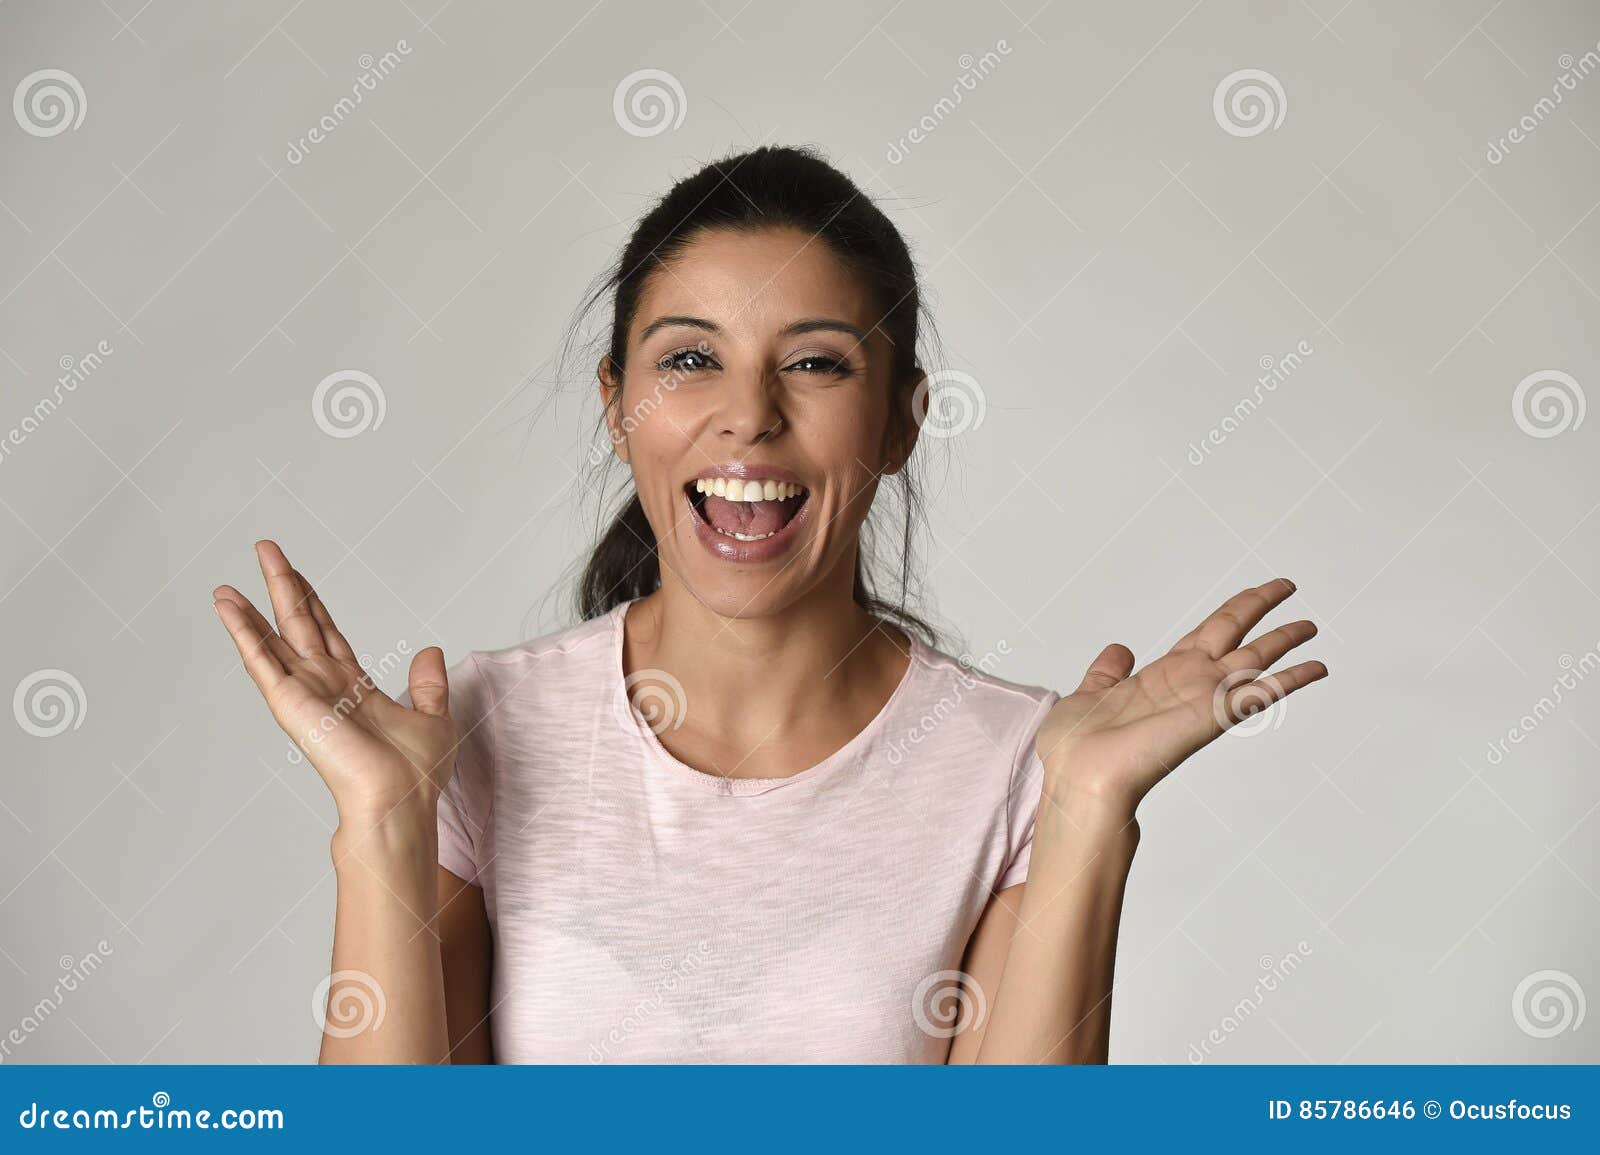 portrait of young beautiful and happy latin woman with big toothy smile excited and cheerful